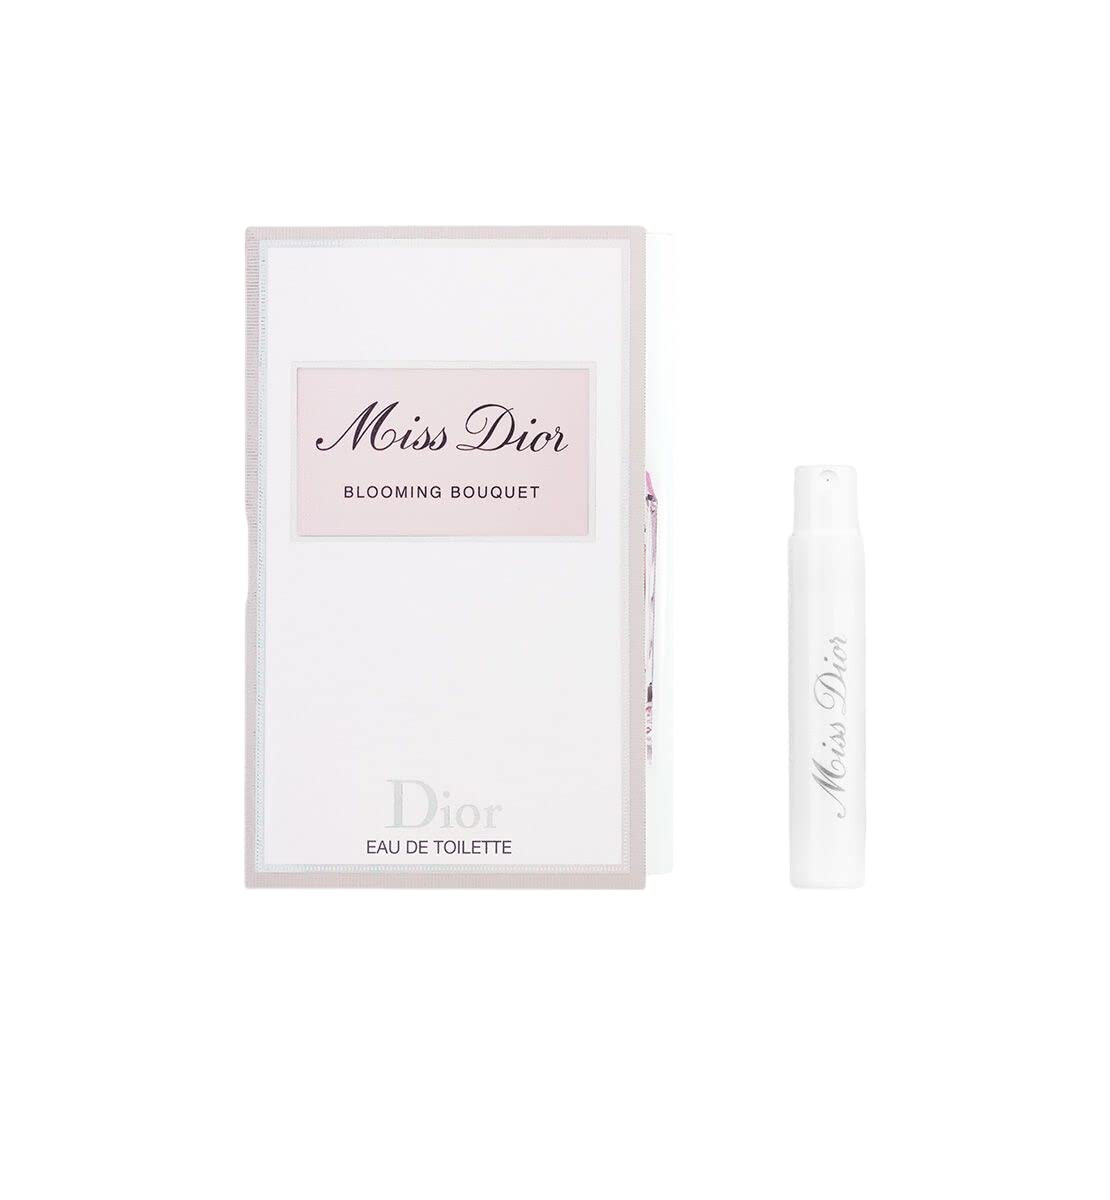 TRY IT FIRST  Free La Collection Privée Sample  DIOR